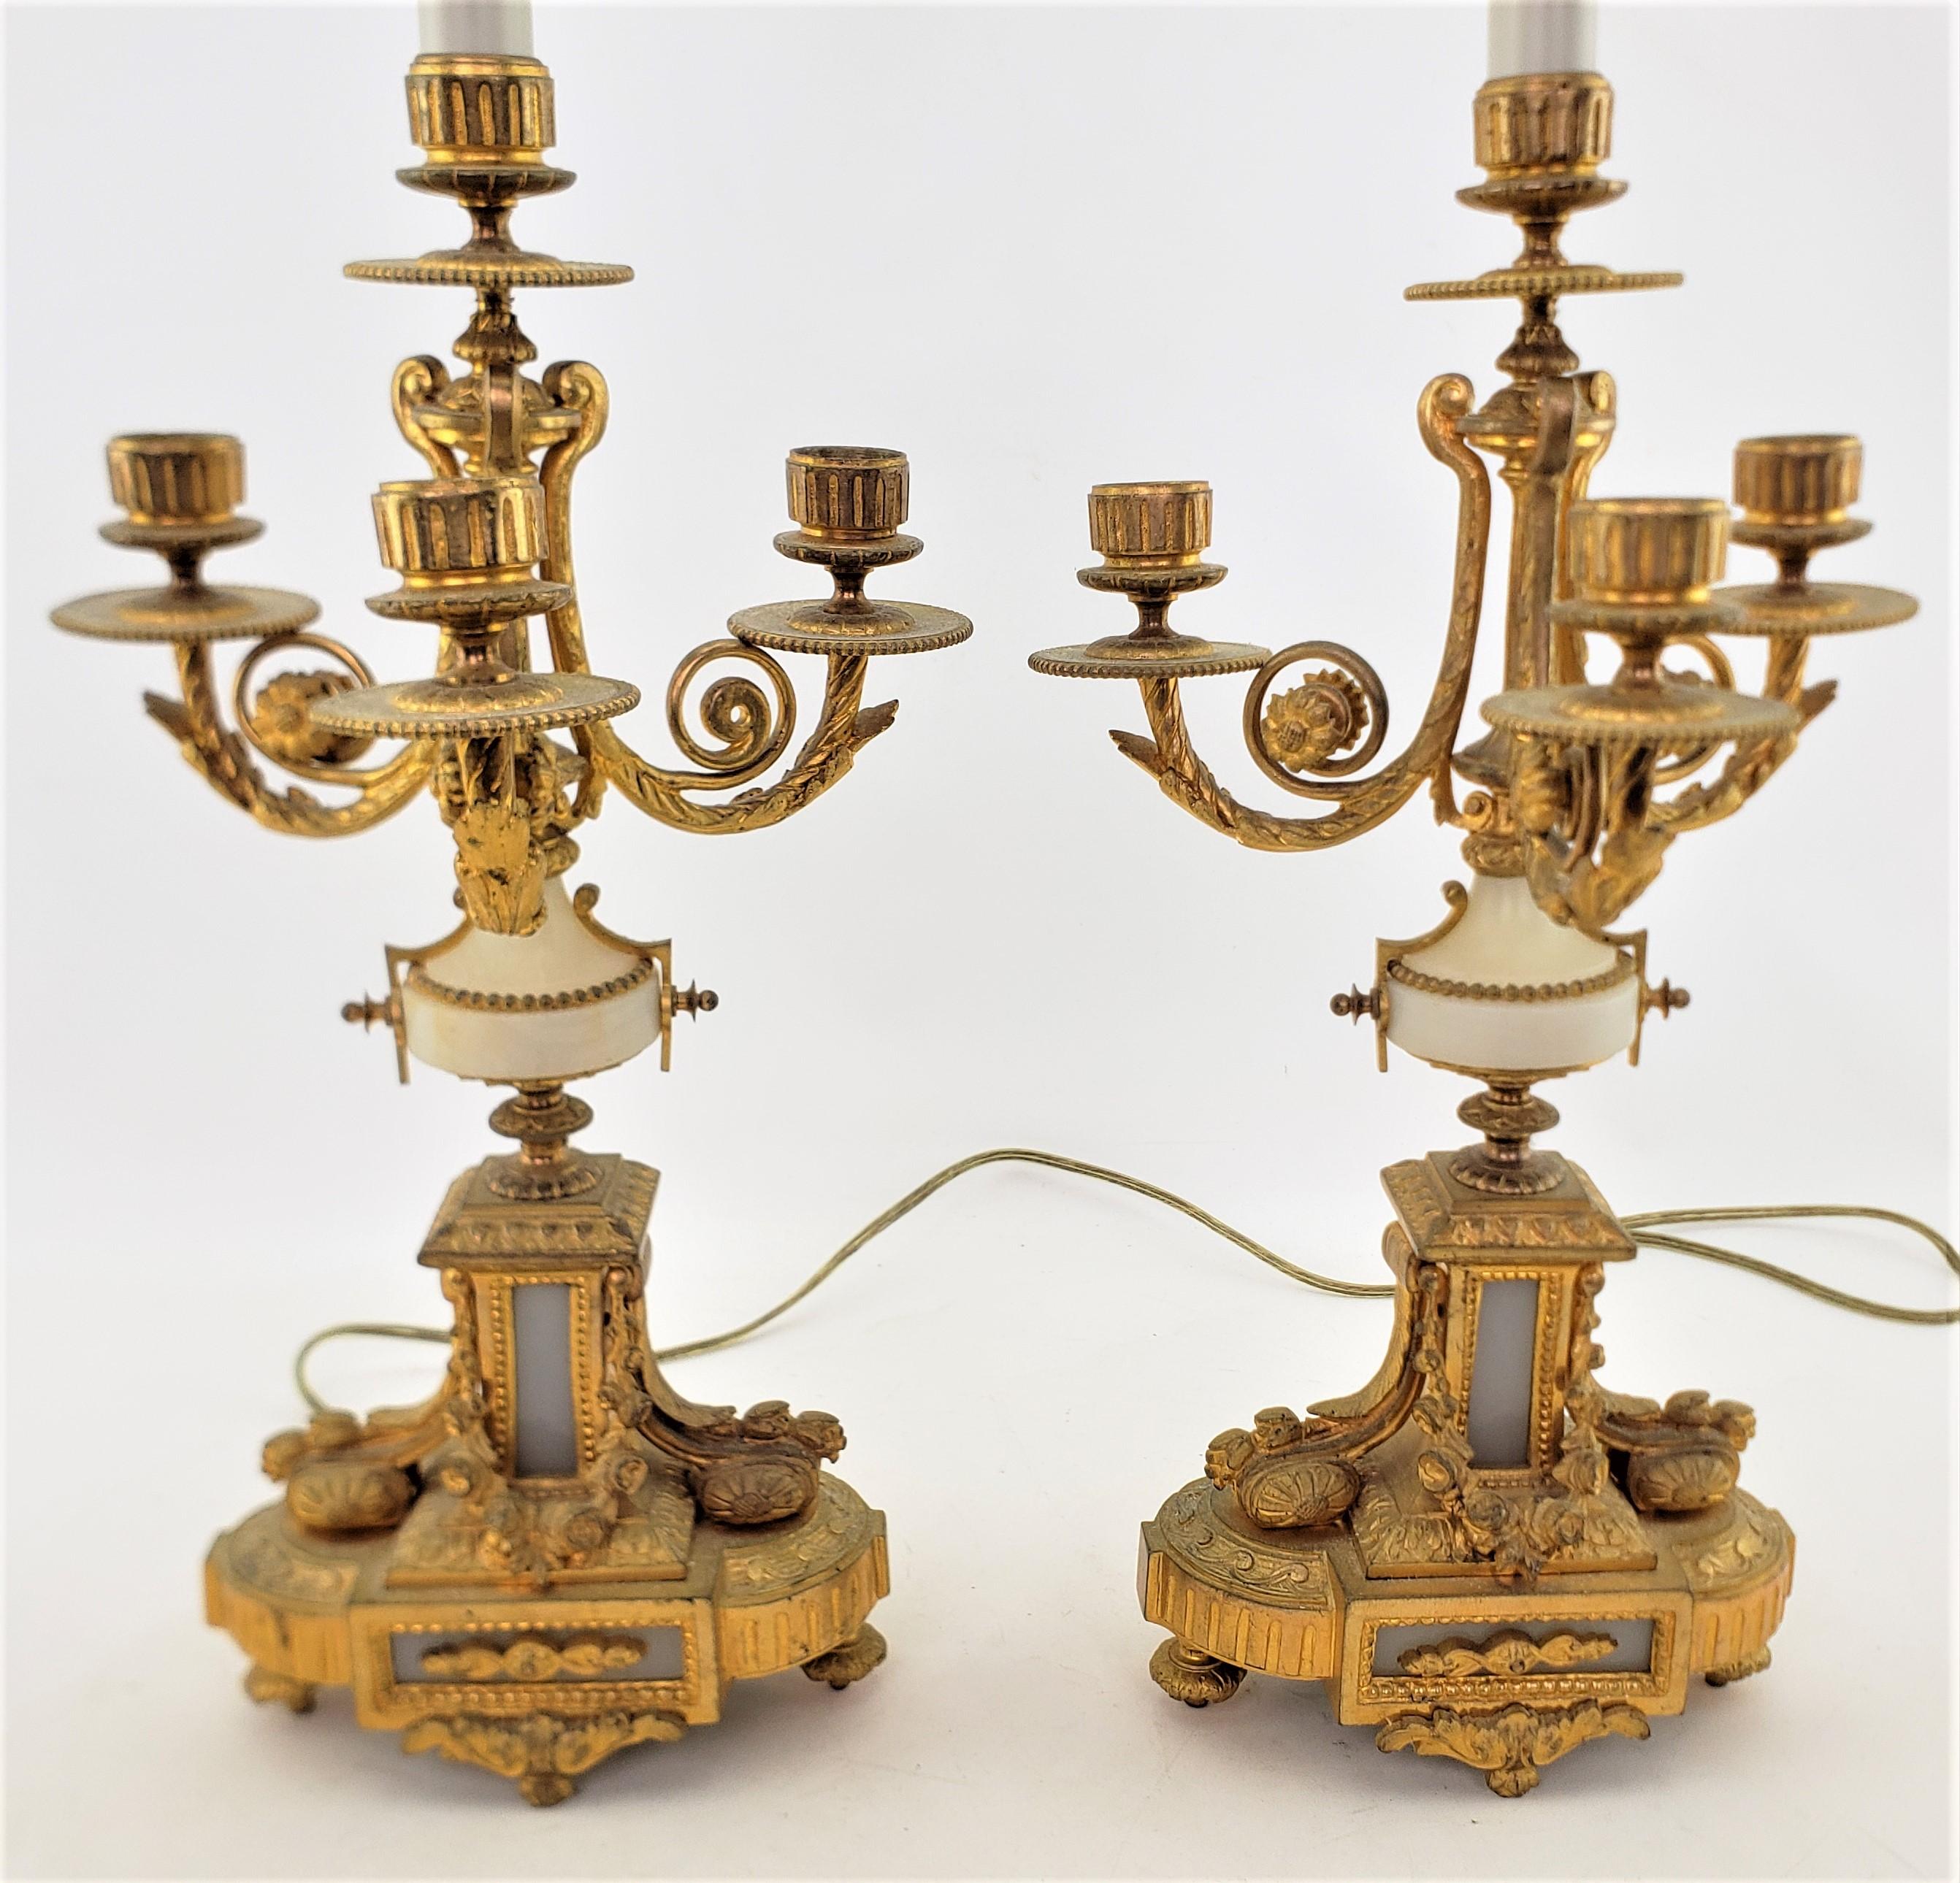 Pair of Ornate Antique French Gilt Bronze Converted Candelabra Table Lamps For Sale 5